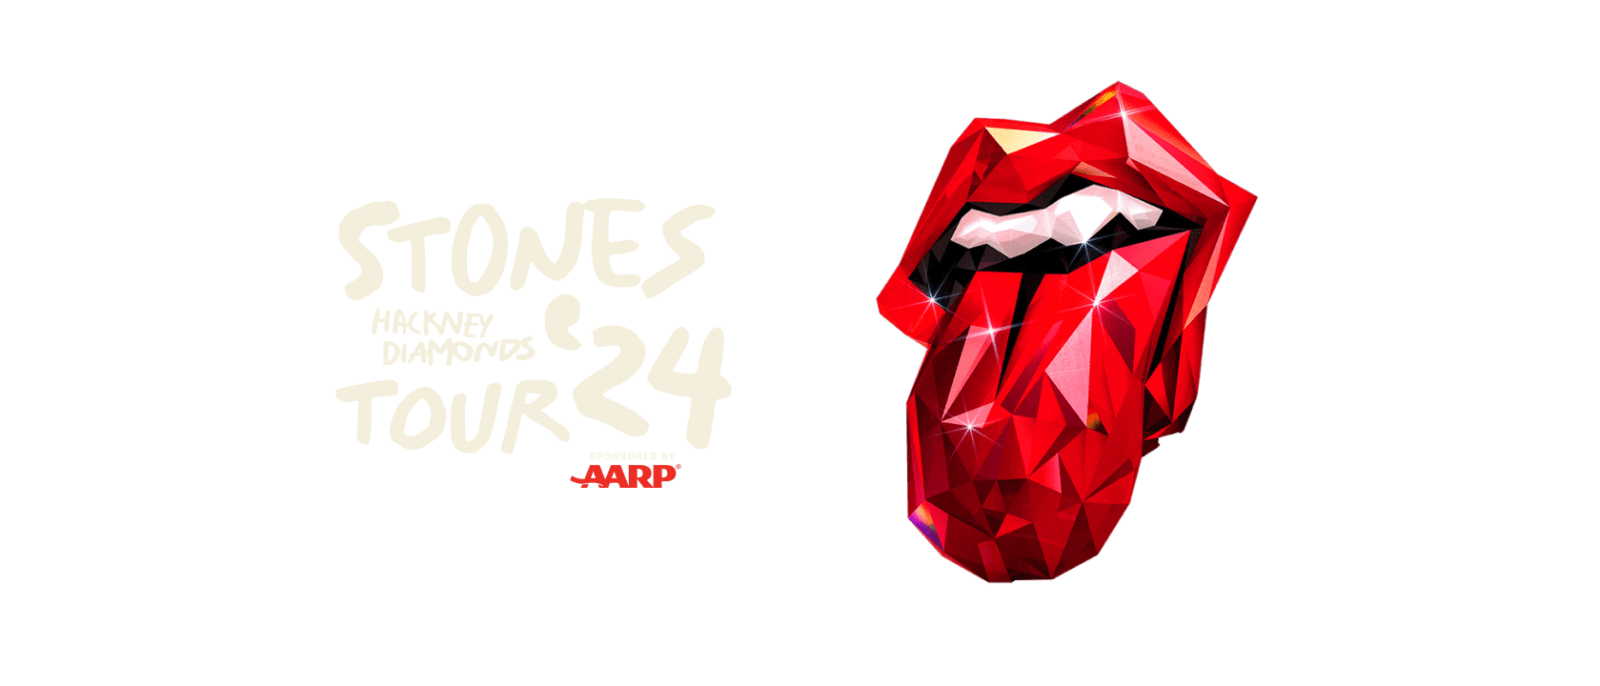 The Rolling Stones Announce Hackney Diamonds Tour 2024 – Backstage Axxess